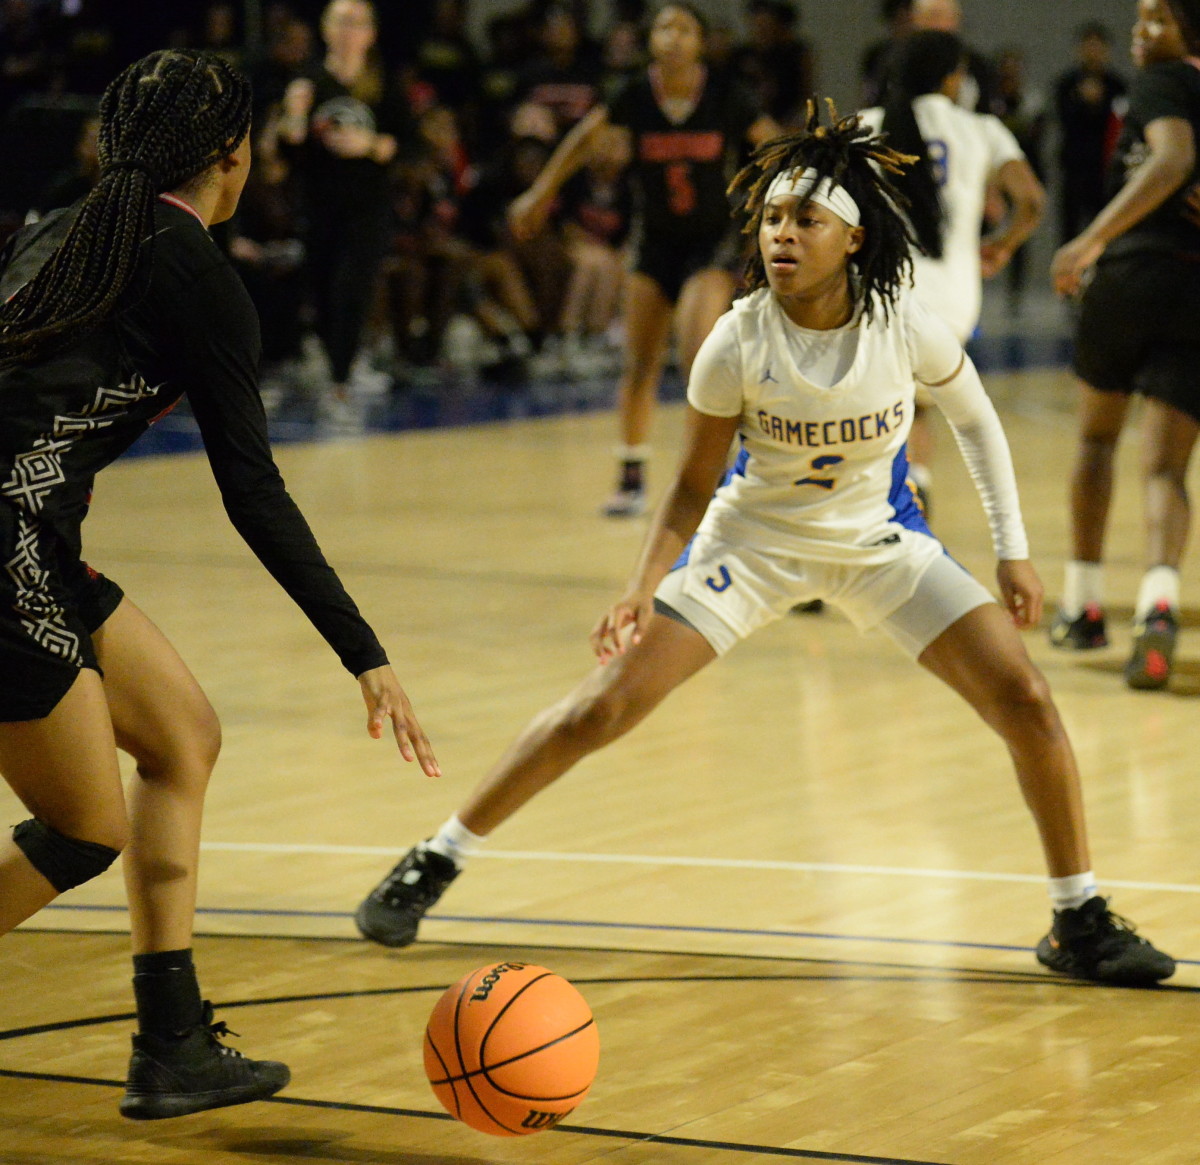 Sumter's Keziyah Sanders plays some tight defense in the girls 5-A Lower State championship game, but Stratford prevailed, 38-35.